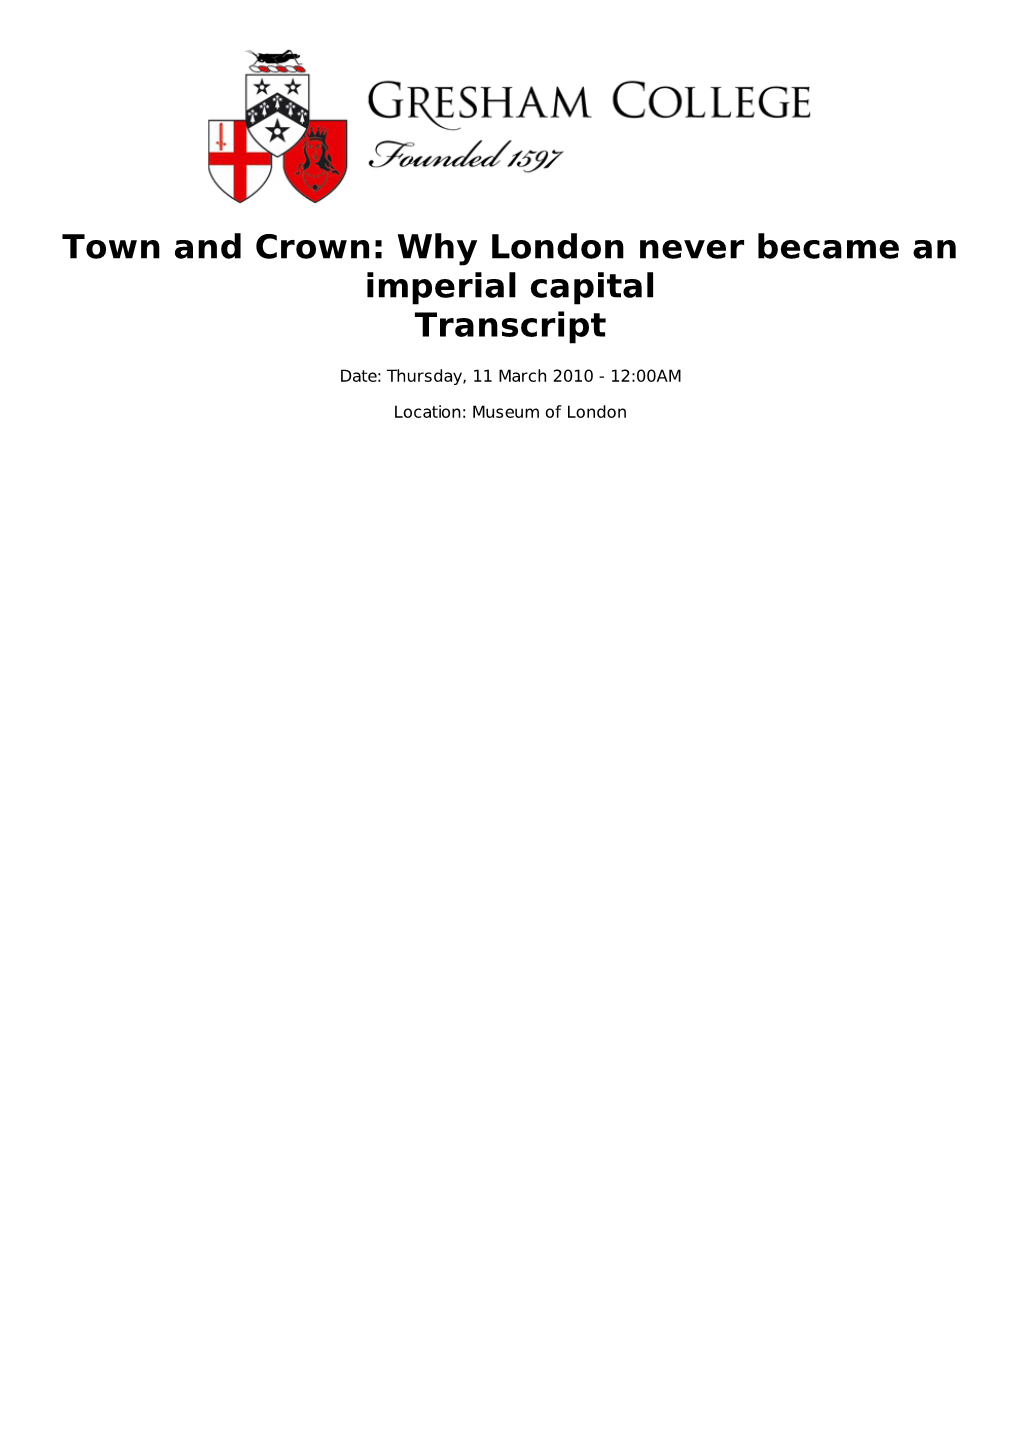 Why London Never Became an Imperial Capital Transcript